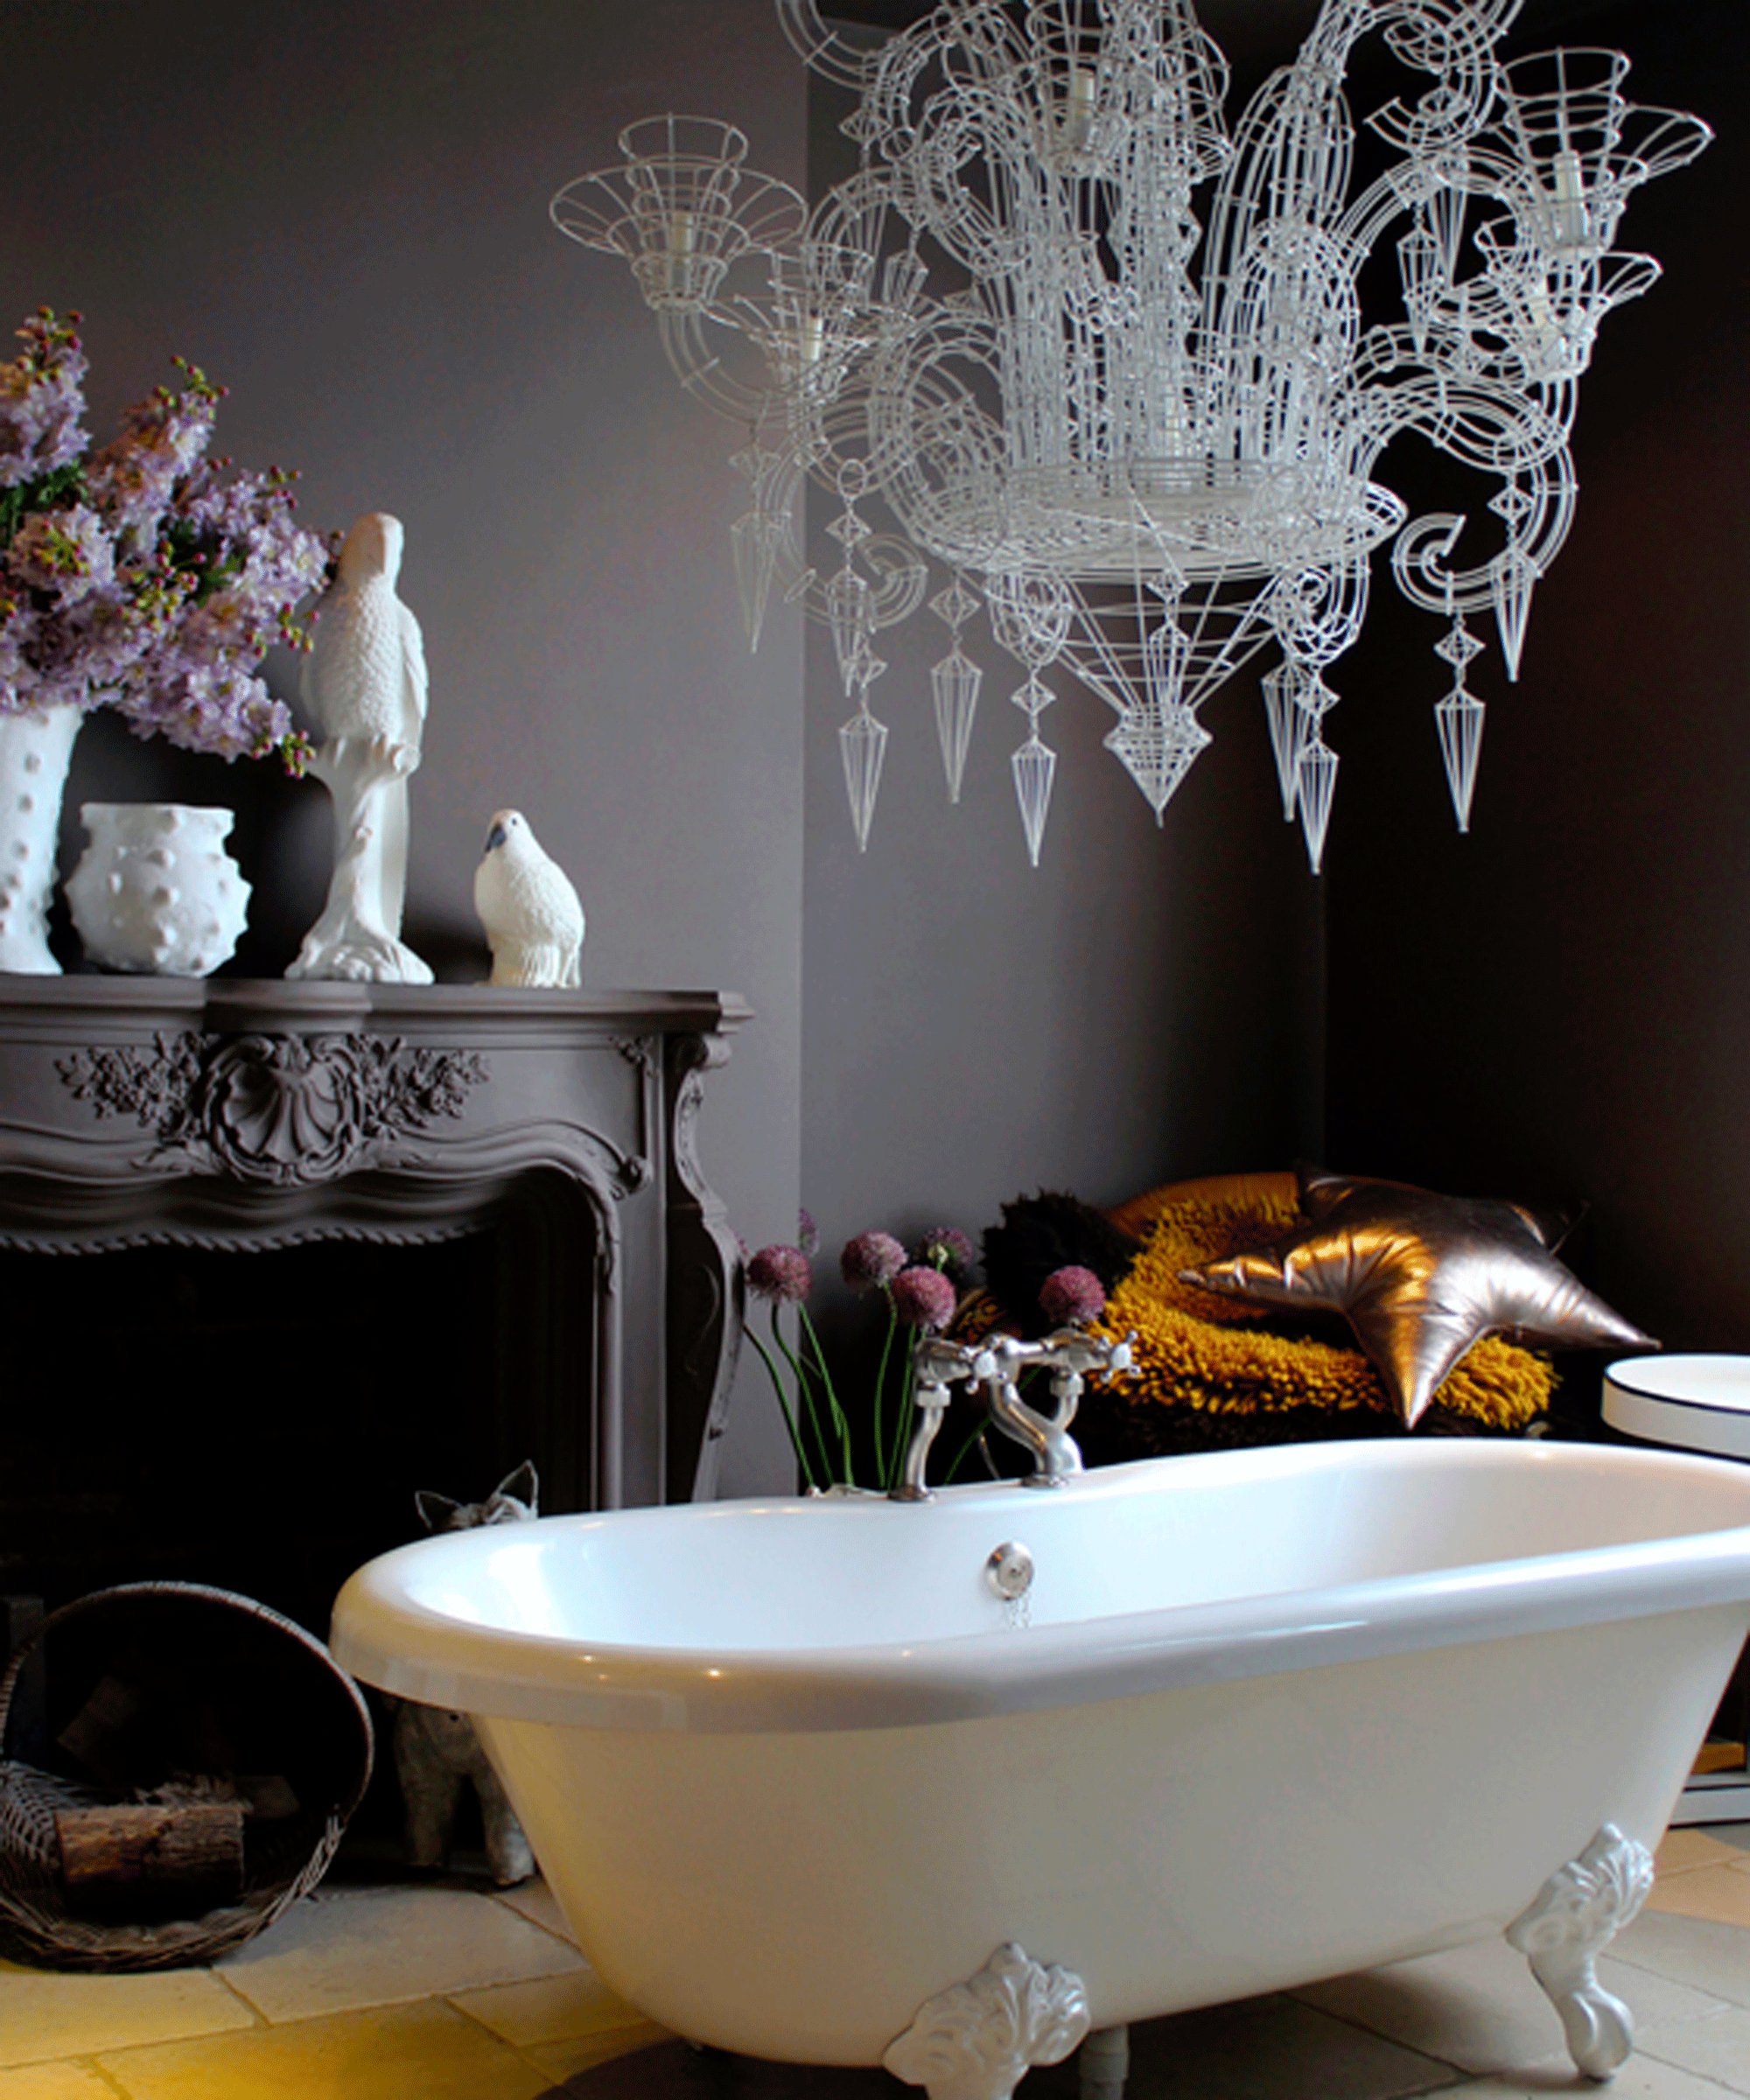 Bathroom with dark walls with freestanding bath and a chandelier